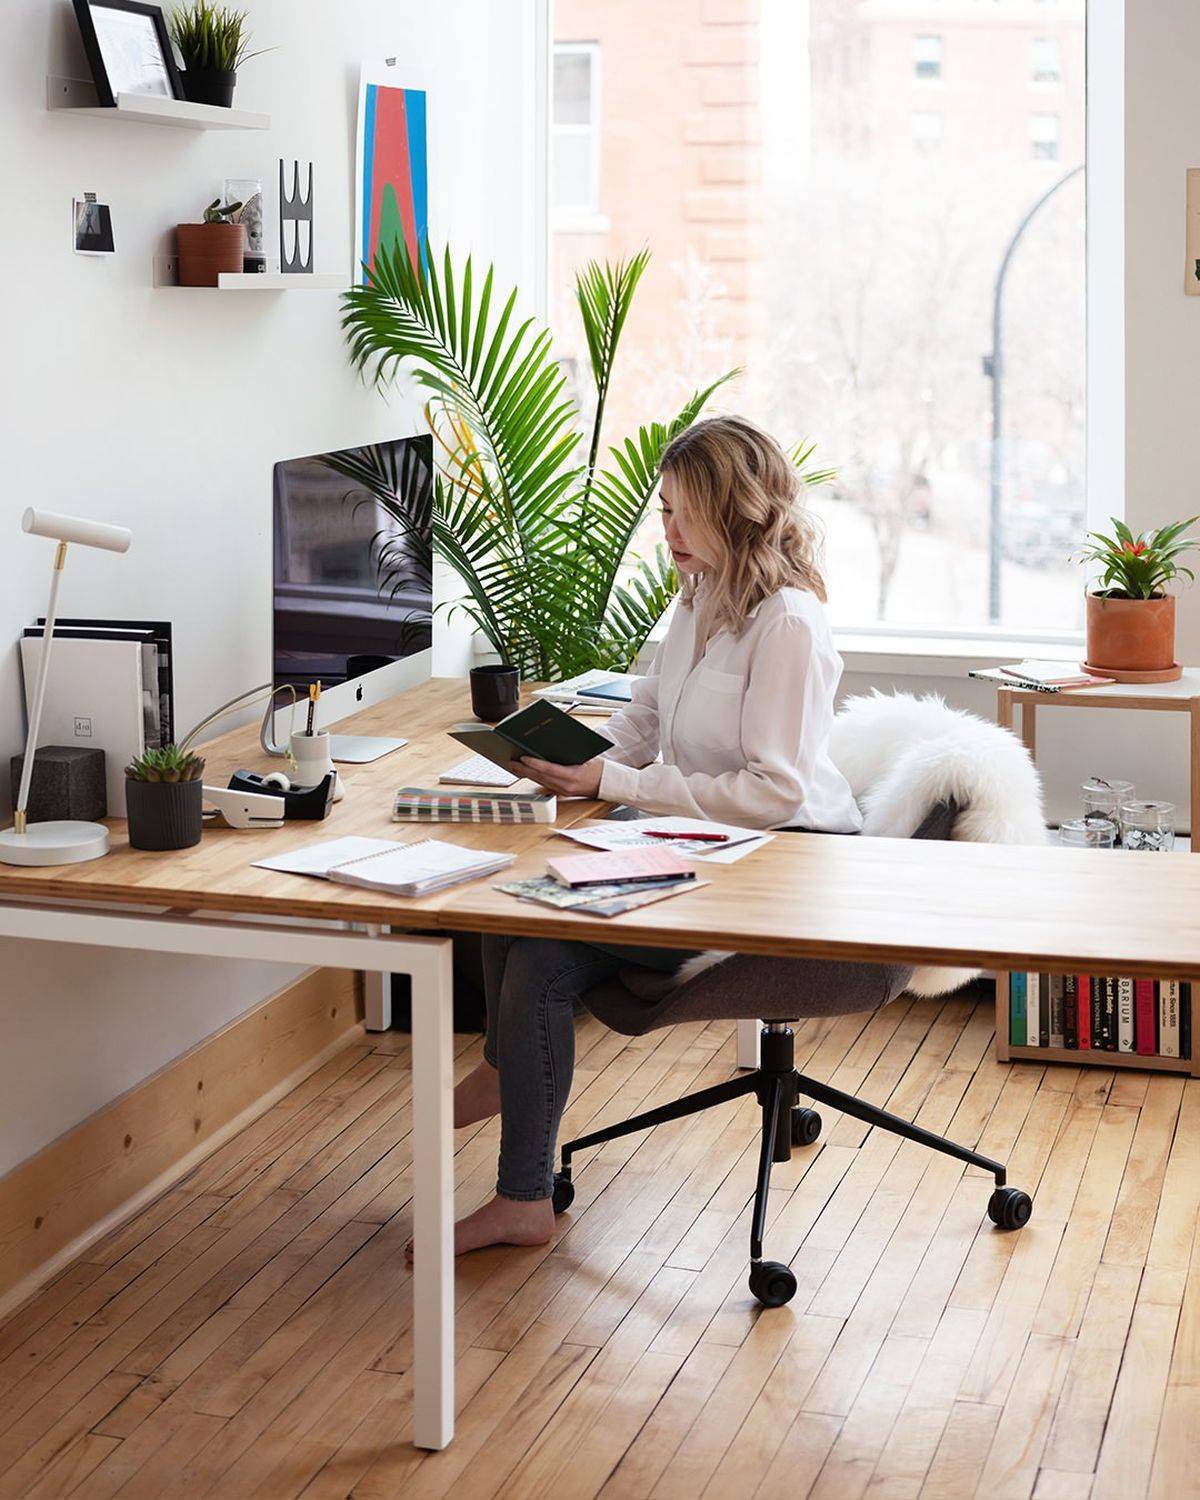 Give your home office a much-needed makeover this season